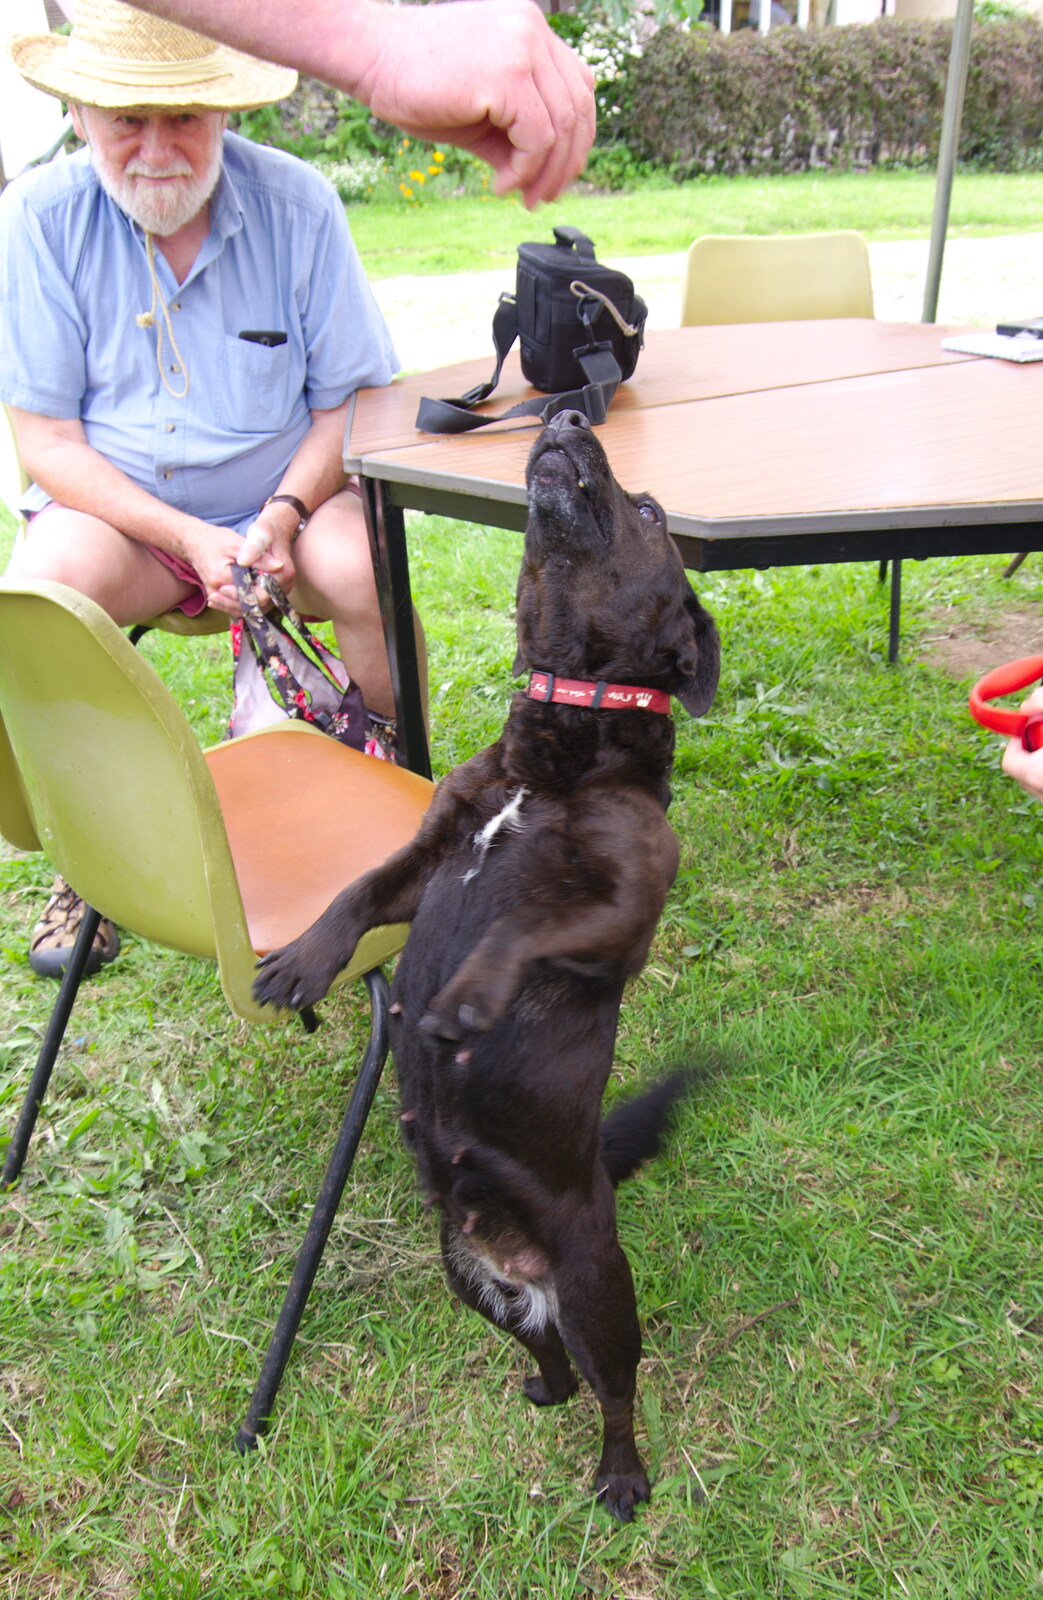 Pip does a trick for food from A Hog Roast on Little Green, Thrandeston, Suffolk - 23rd June 2019